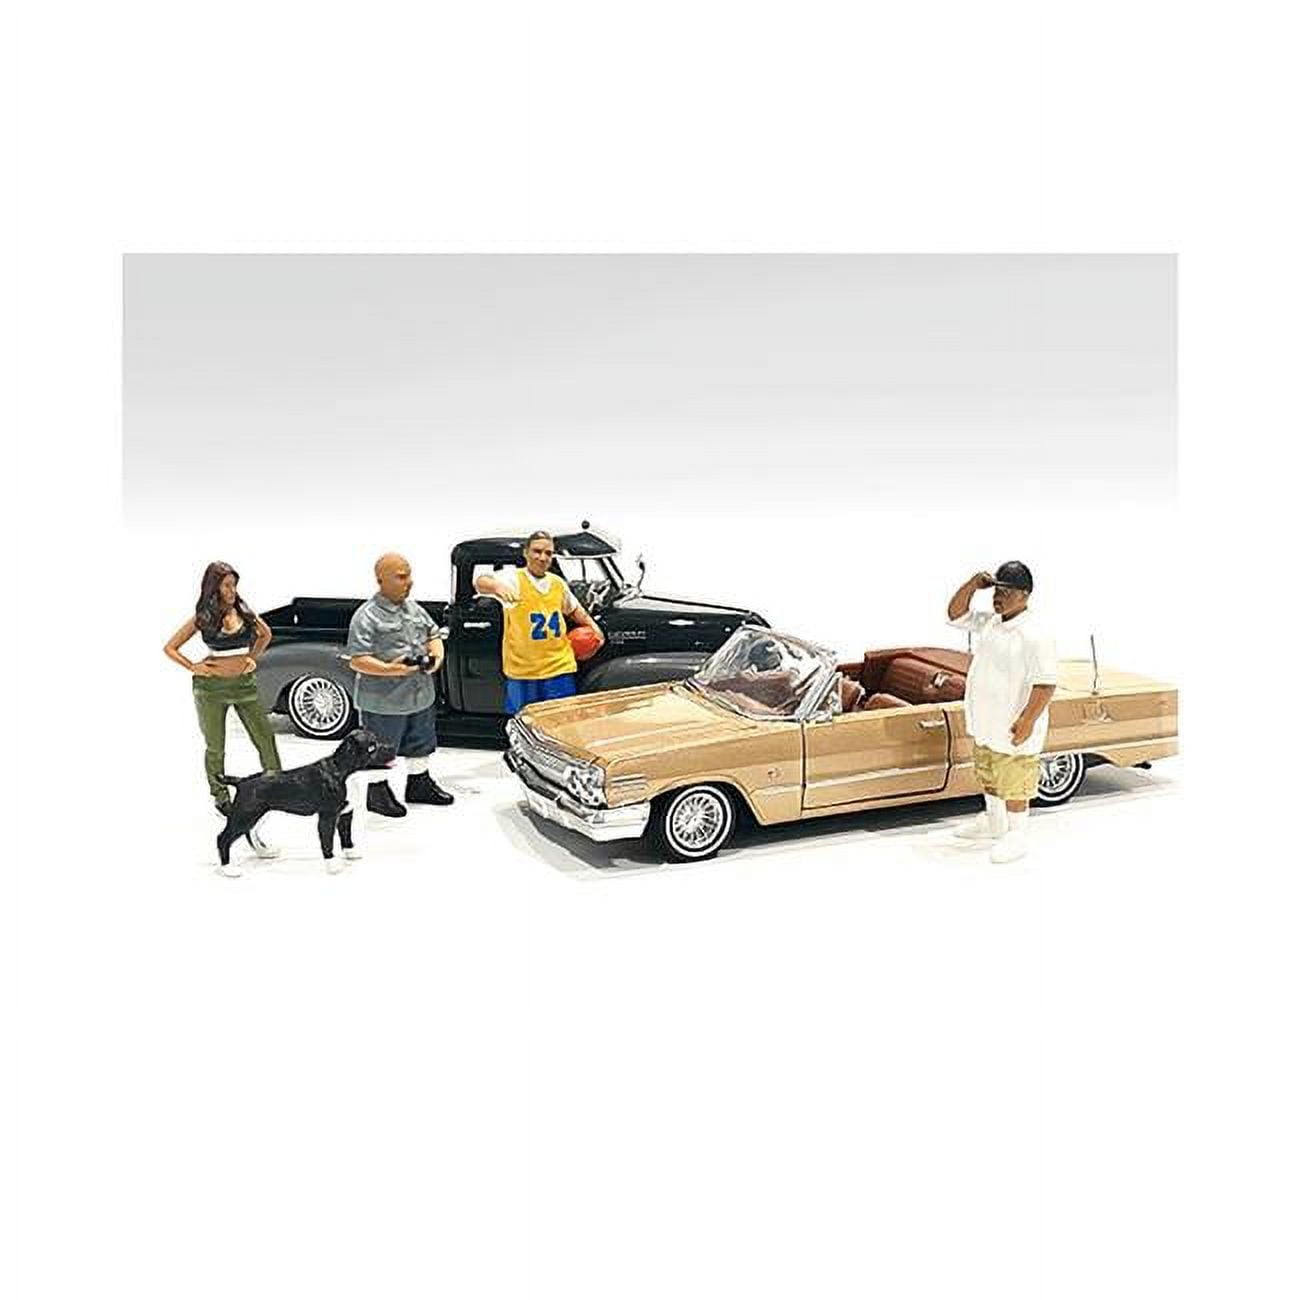 Picture of American Diorama 76273-76274-76275-76276 3.75-4 in. Lowriderz & A Dog Figurine Set for 1 by 18 Scale Models - 5 Piece